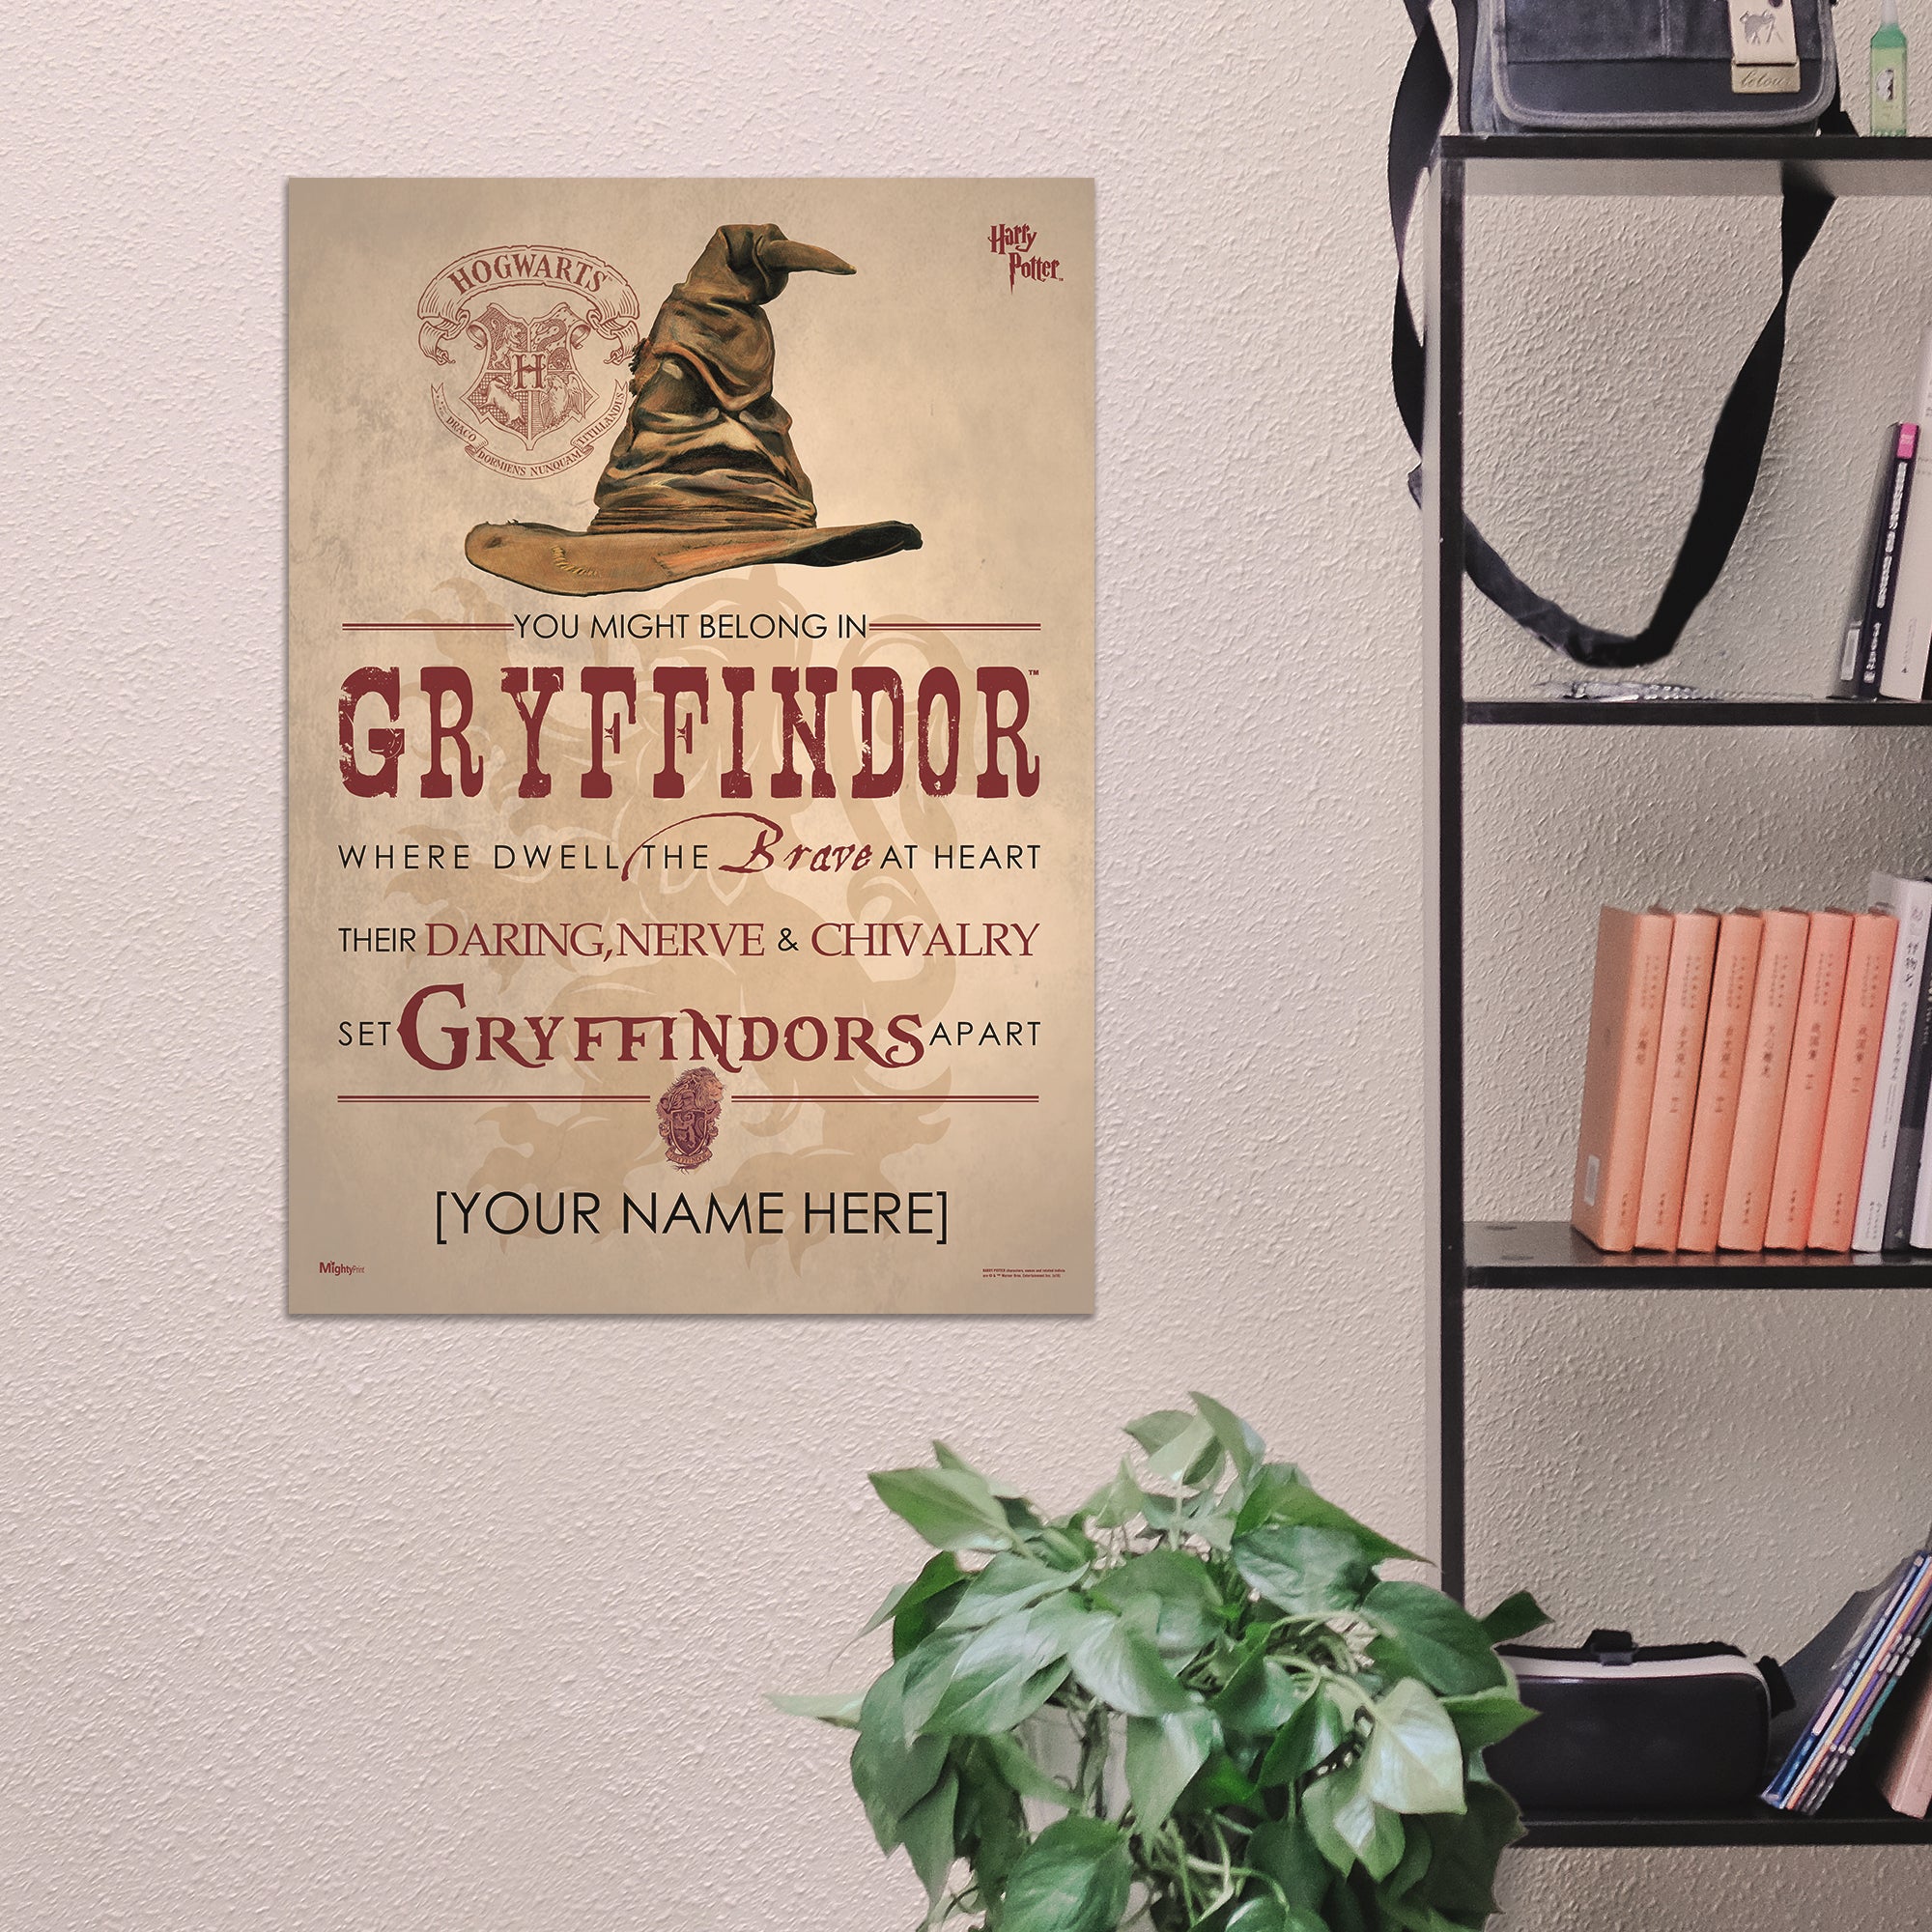 MightyPrint Harry Potter (Sorting Hat Hufflepuff - Personalized